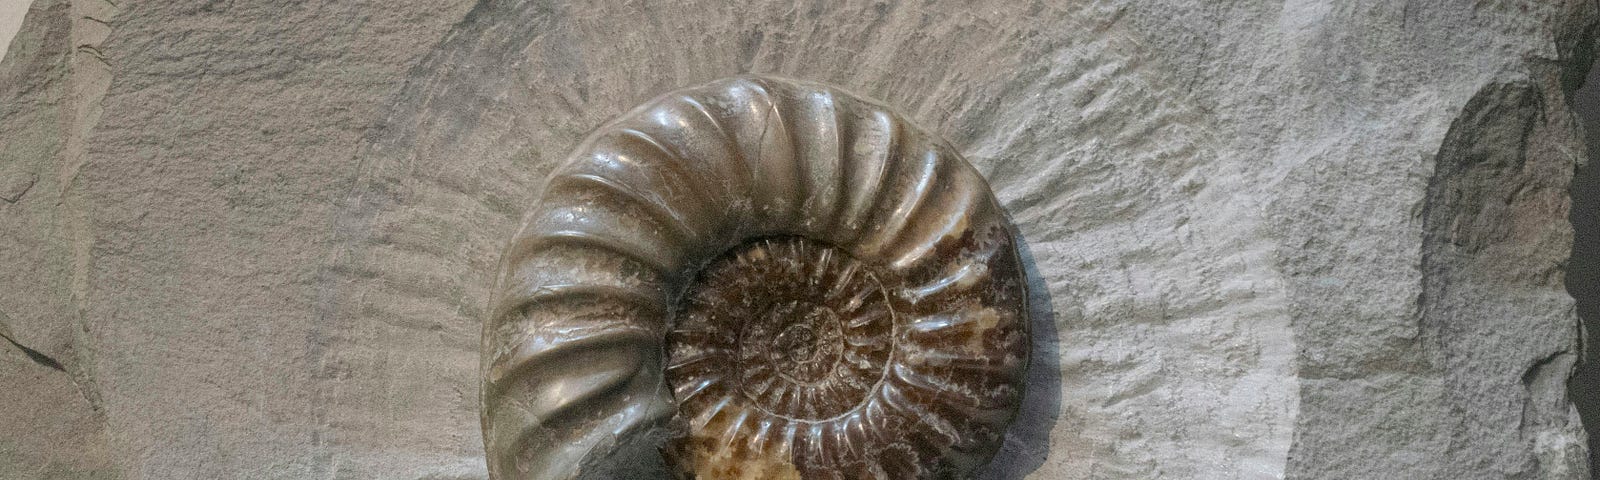 A nautilus fossil carefully carved out of the surrounding rock.